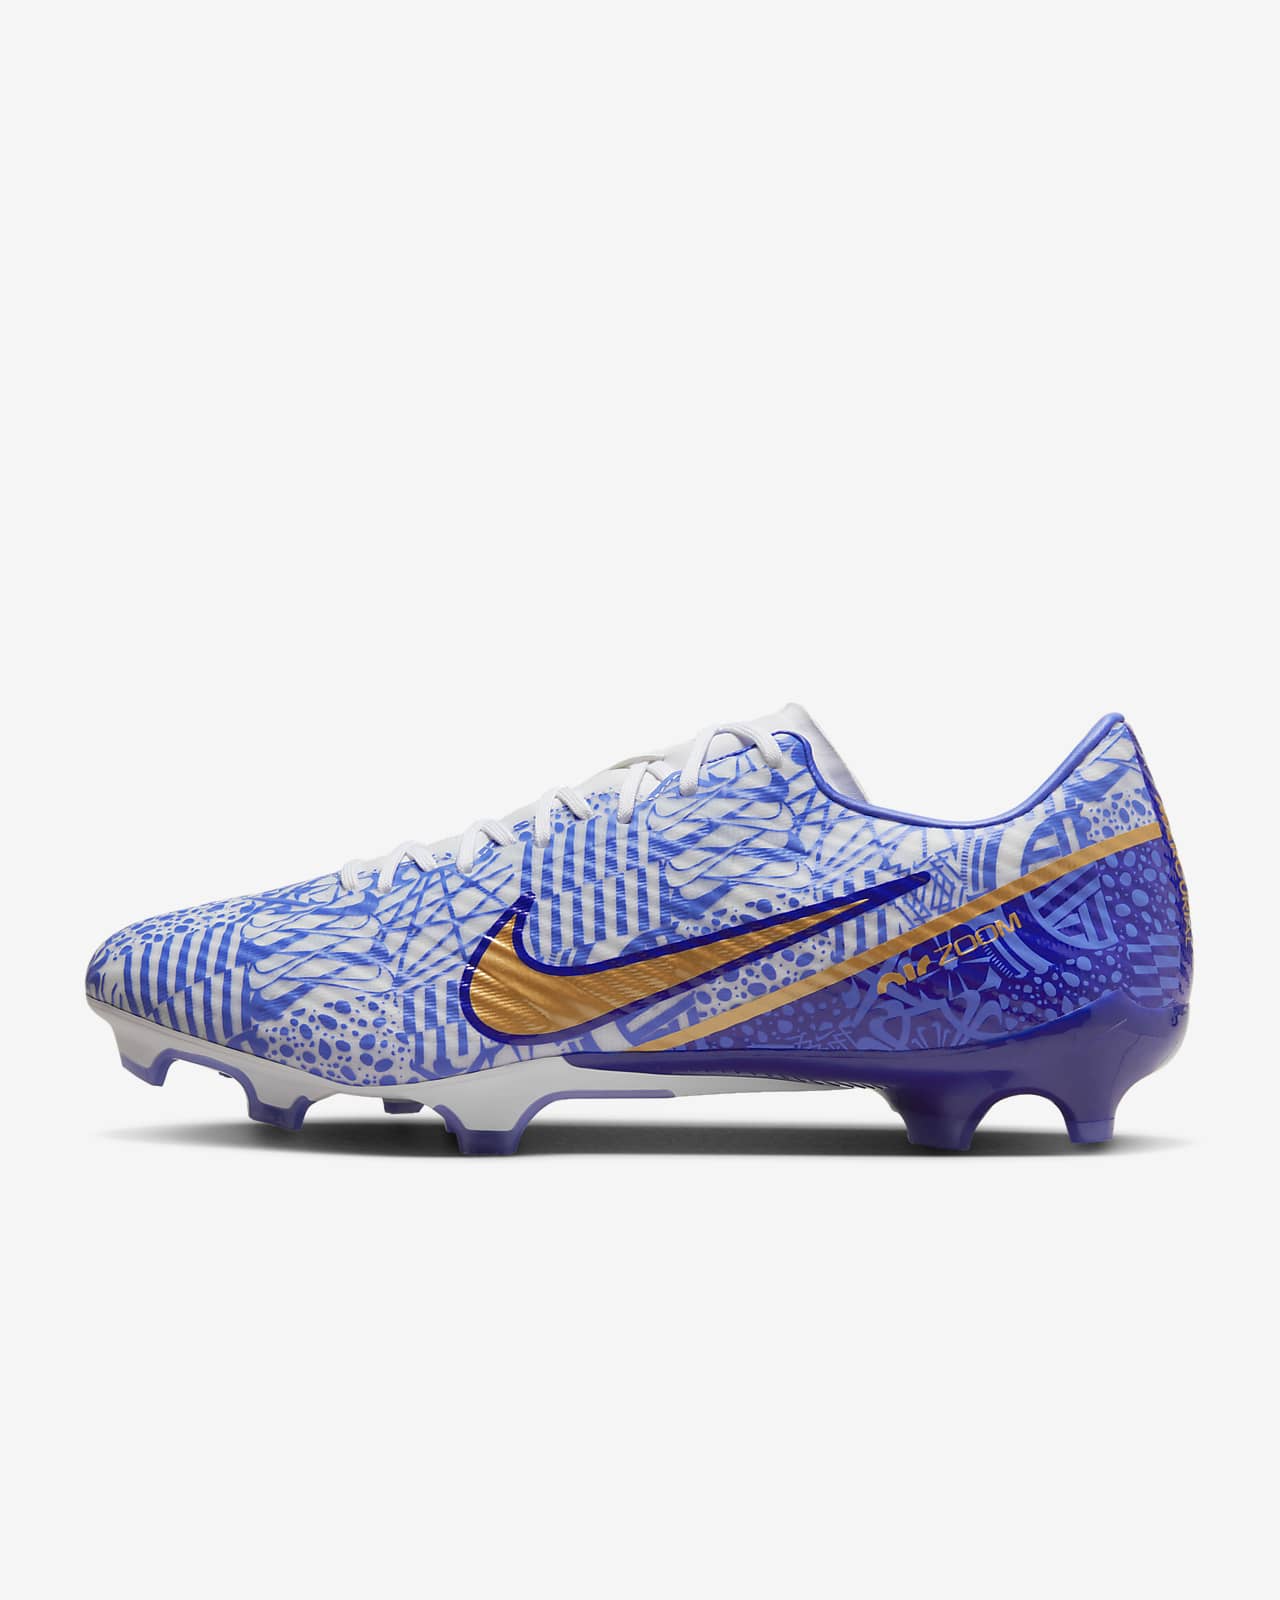 Cleats Nike Soccer | peacecommission.kdsg.gov.ng